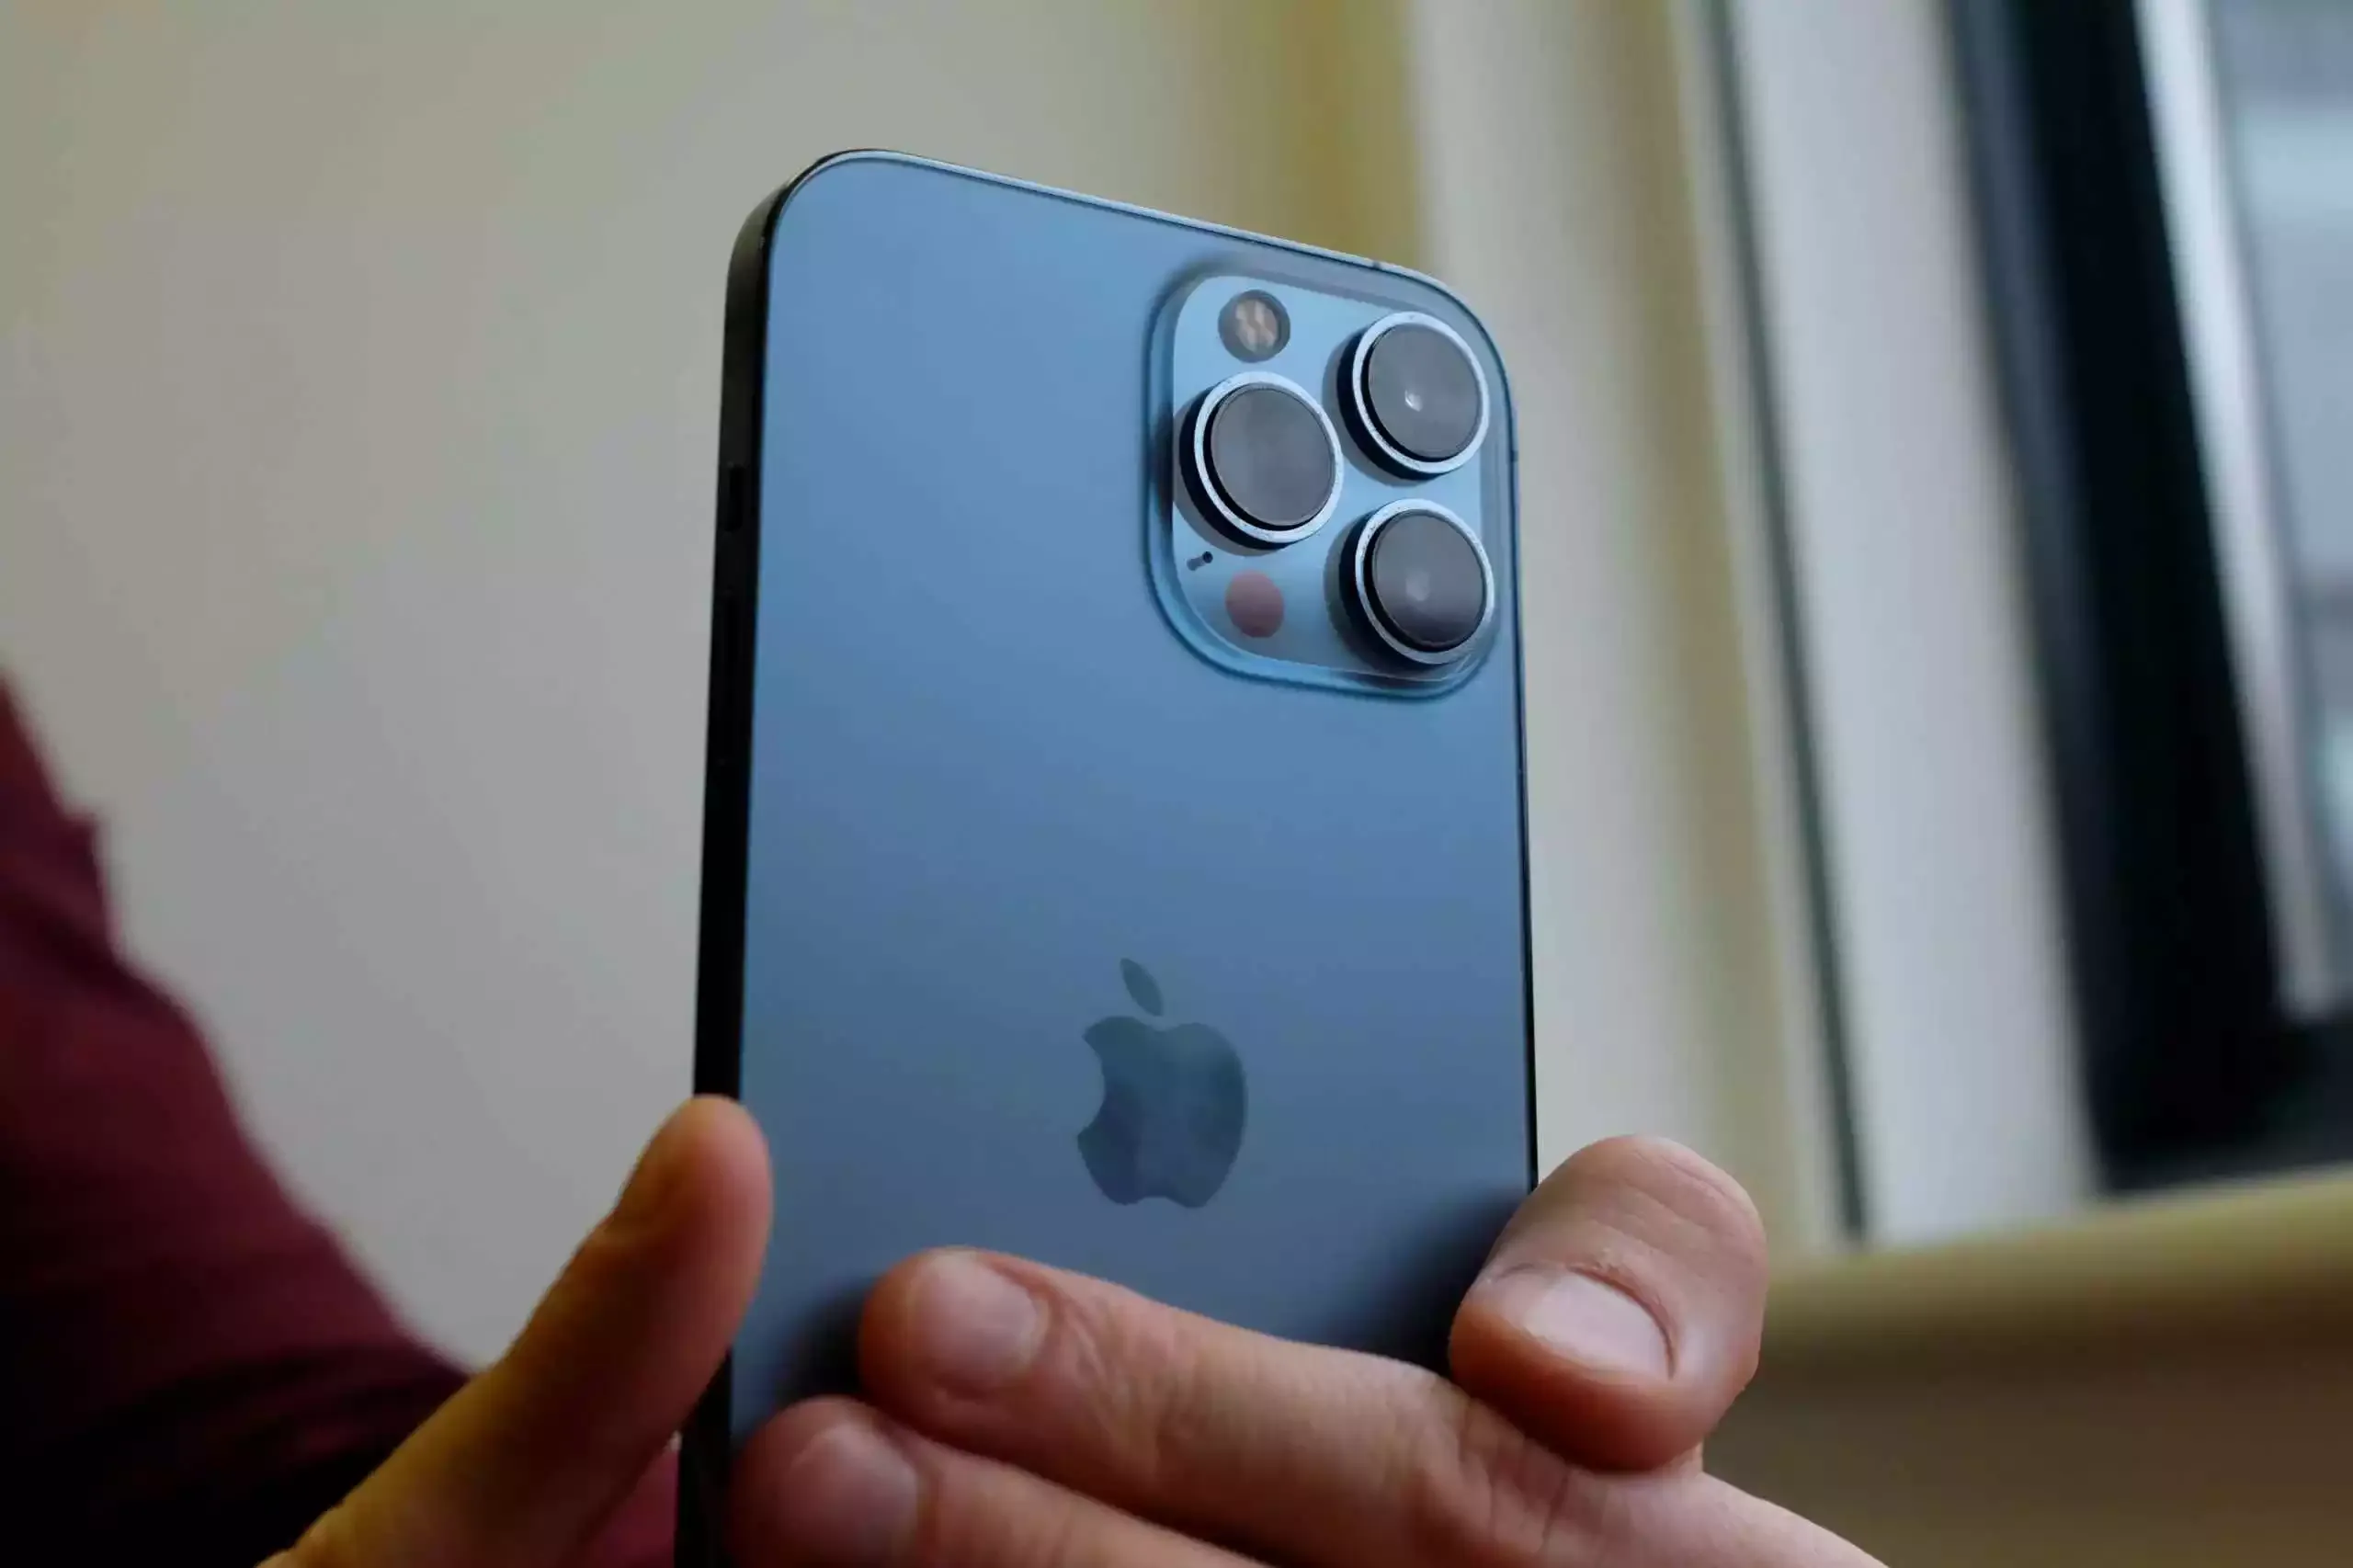 iPhone 14 will offer a better selfie camera with autofocus